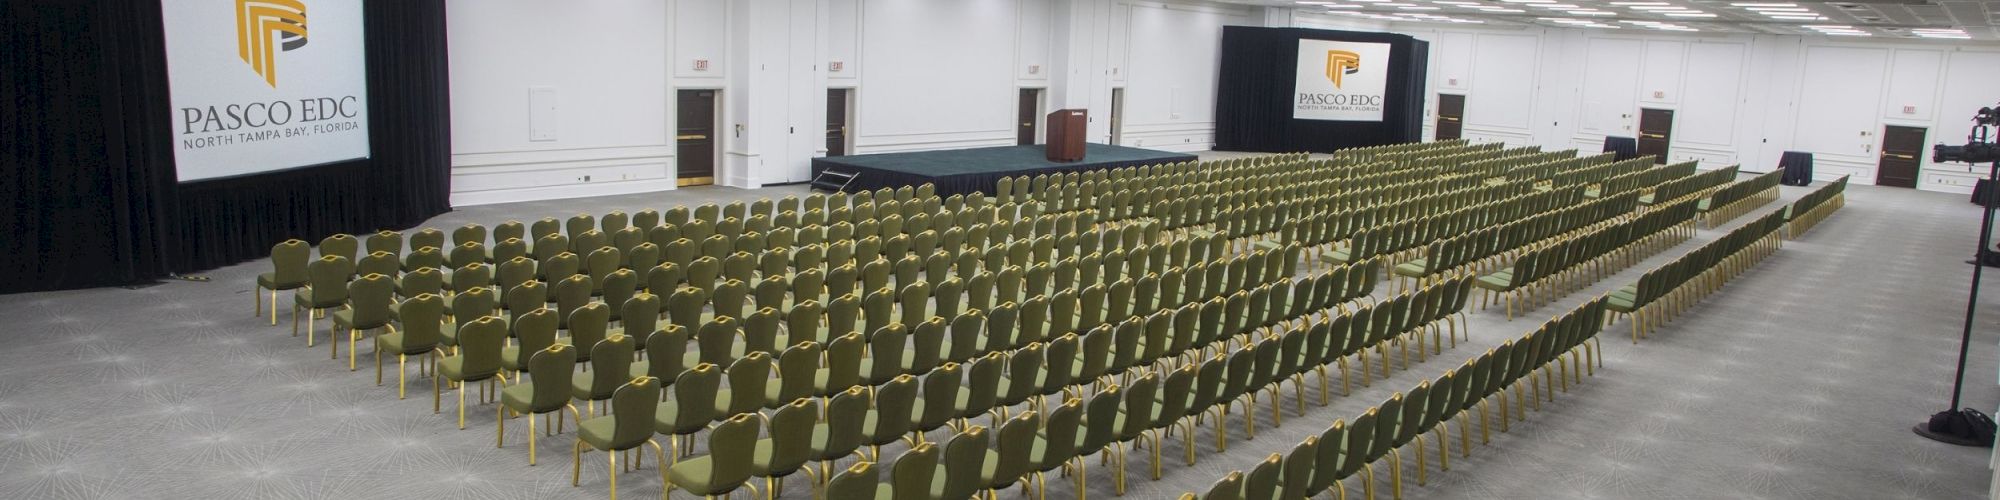 An empty conference room with rows of green chairs facing a stage with two screens displaying 